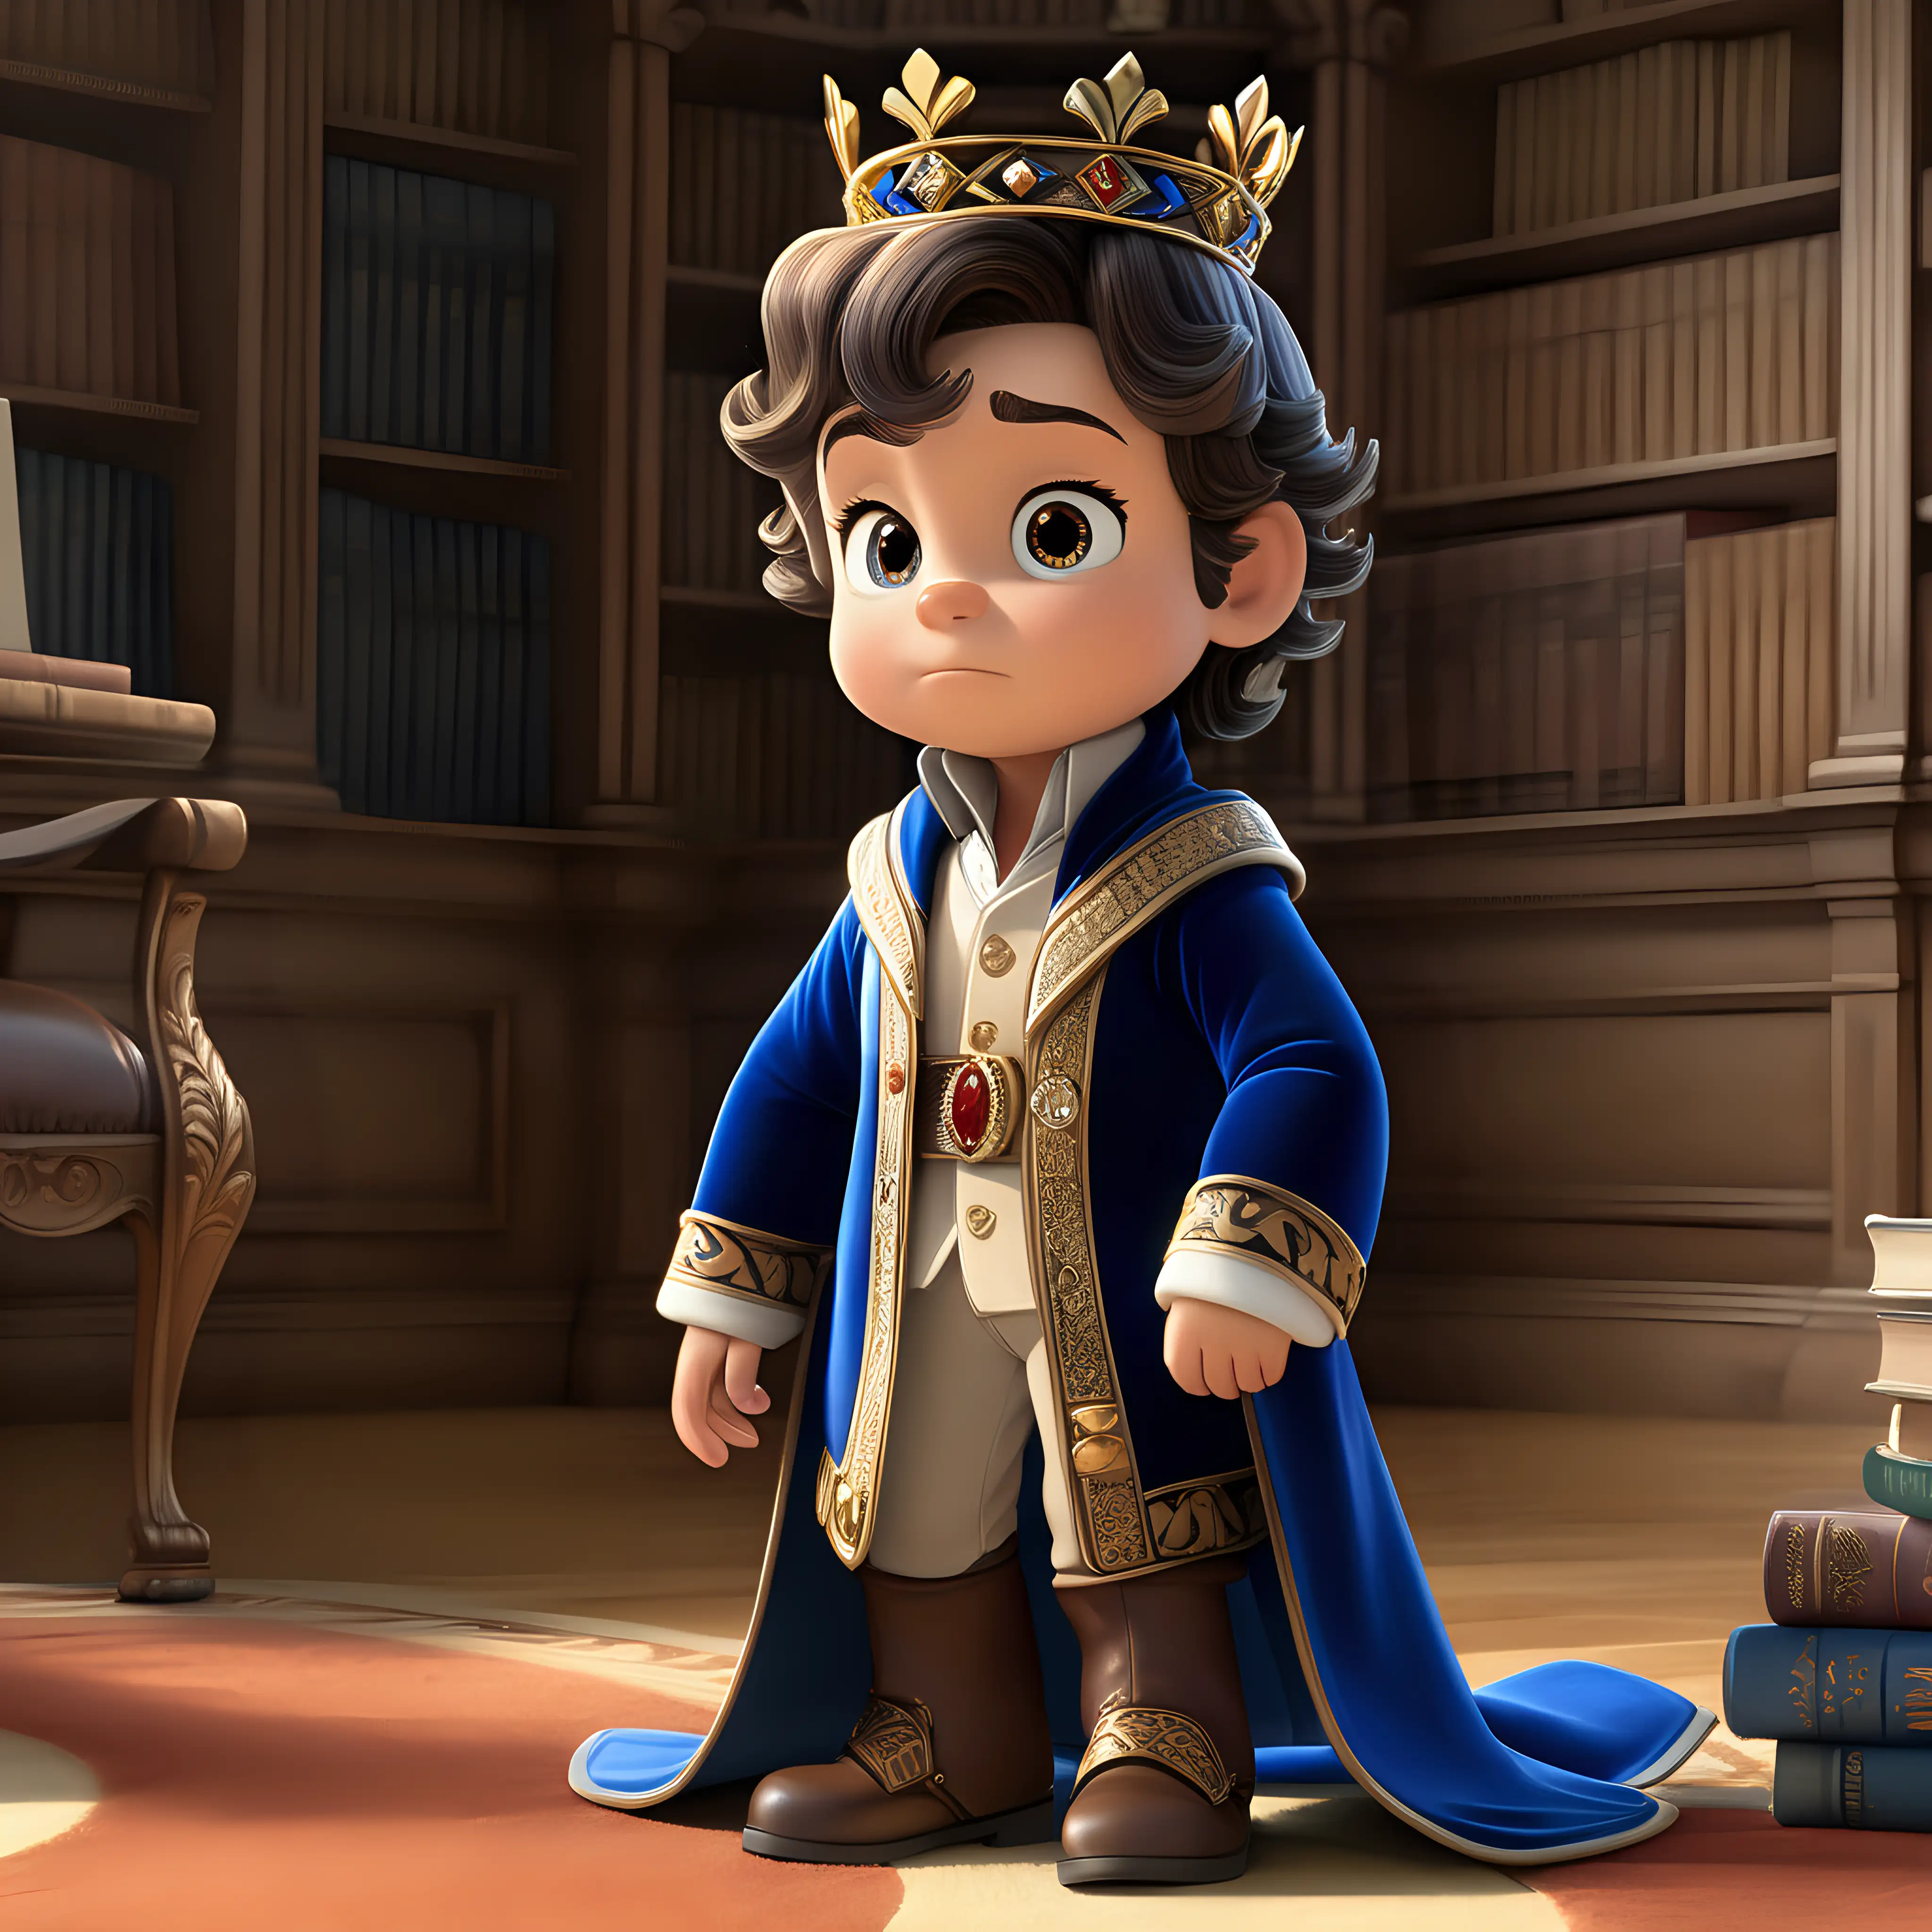 The charming three-year-old prince is dressed in regal attire that reflects his royal heritage with a touch of youthful elegance, perfect for a character in an animated series. He wears a simple yet distinguished royal blue velvet robe, devoid of excessive embellishments, exuding understated refinement even in its animated form. The robe is tailored to perfection, its rich hue complementing the warmth of the library's ambiance in the whimsical world of animation.

Around his waist, a slim belt of soft brown leather cinches the robe gently, adding a subtle accent without overshadowing the ensemble's grace. His trousers, fashioned from the same royal blue velvet, fall crisply, hinting at the meticulous attention to detail characteristic of animated characters.

Upon his feet, knee-high leather boots of a deep, polished brown complete the ensemble, their classic design adding a regal touch to his appearance while remaining faithful to the animated style. His dark brown locks, neatly styled but free-flowing, frame his face with an air of natural charm and innocence, their movement captured in the fluid lines of animation.

Atop his head rests a modest crown, crafted from polished gold without extravagant jewels, symbolizing his royal status with humility rather than opulence. It sits lightly upon his brow, a reminder of his heritage but not a distraction from the genuine curiosity and joy that light up his expressive brown eyes, which sparkle with life in the animated world.

In this refined yet approachable attire, the young prince embodies a timeless elegance that captivates all who behold him, his regal bearing softened by the genuine warmth of his spirit, beautifully rendered in the charming style of animation.